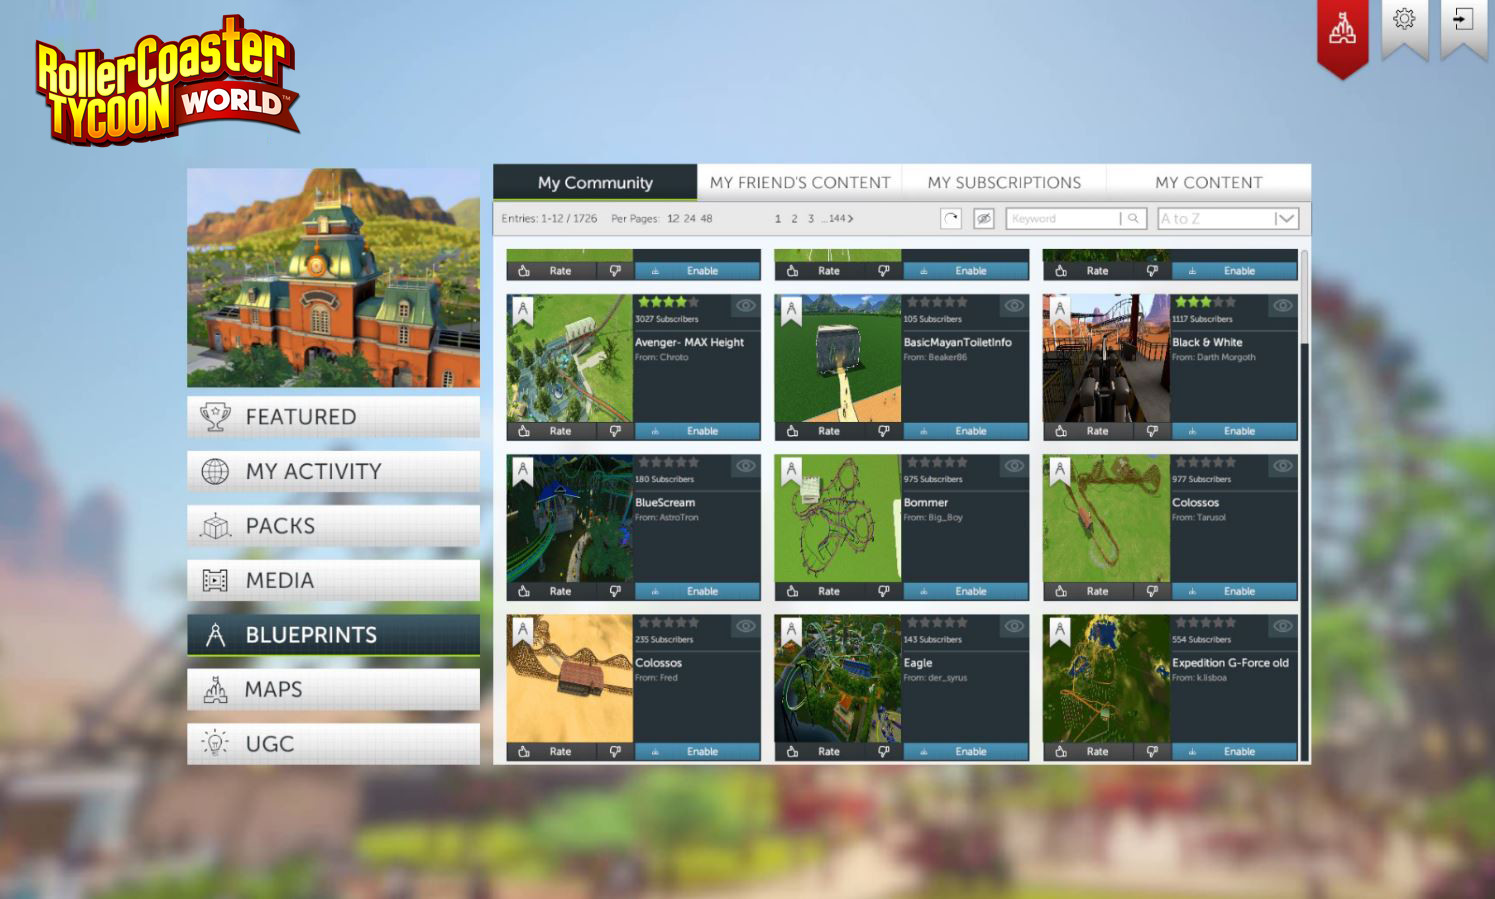 RollerCoaster Tycoon World preview - by Game-Debate